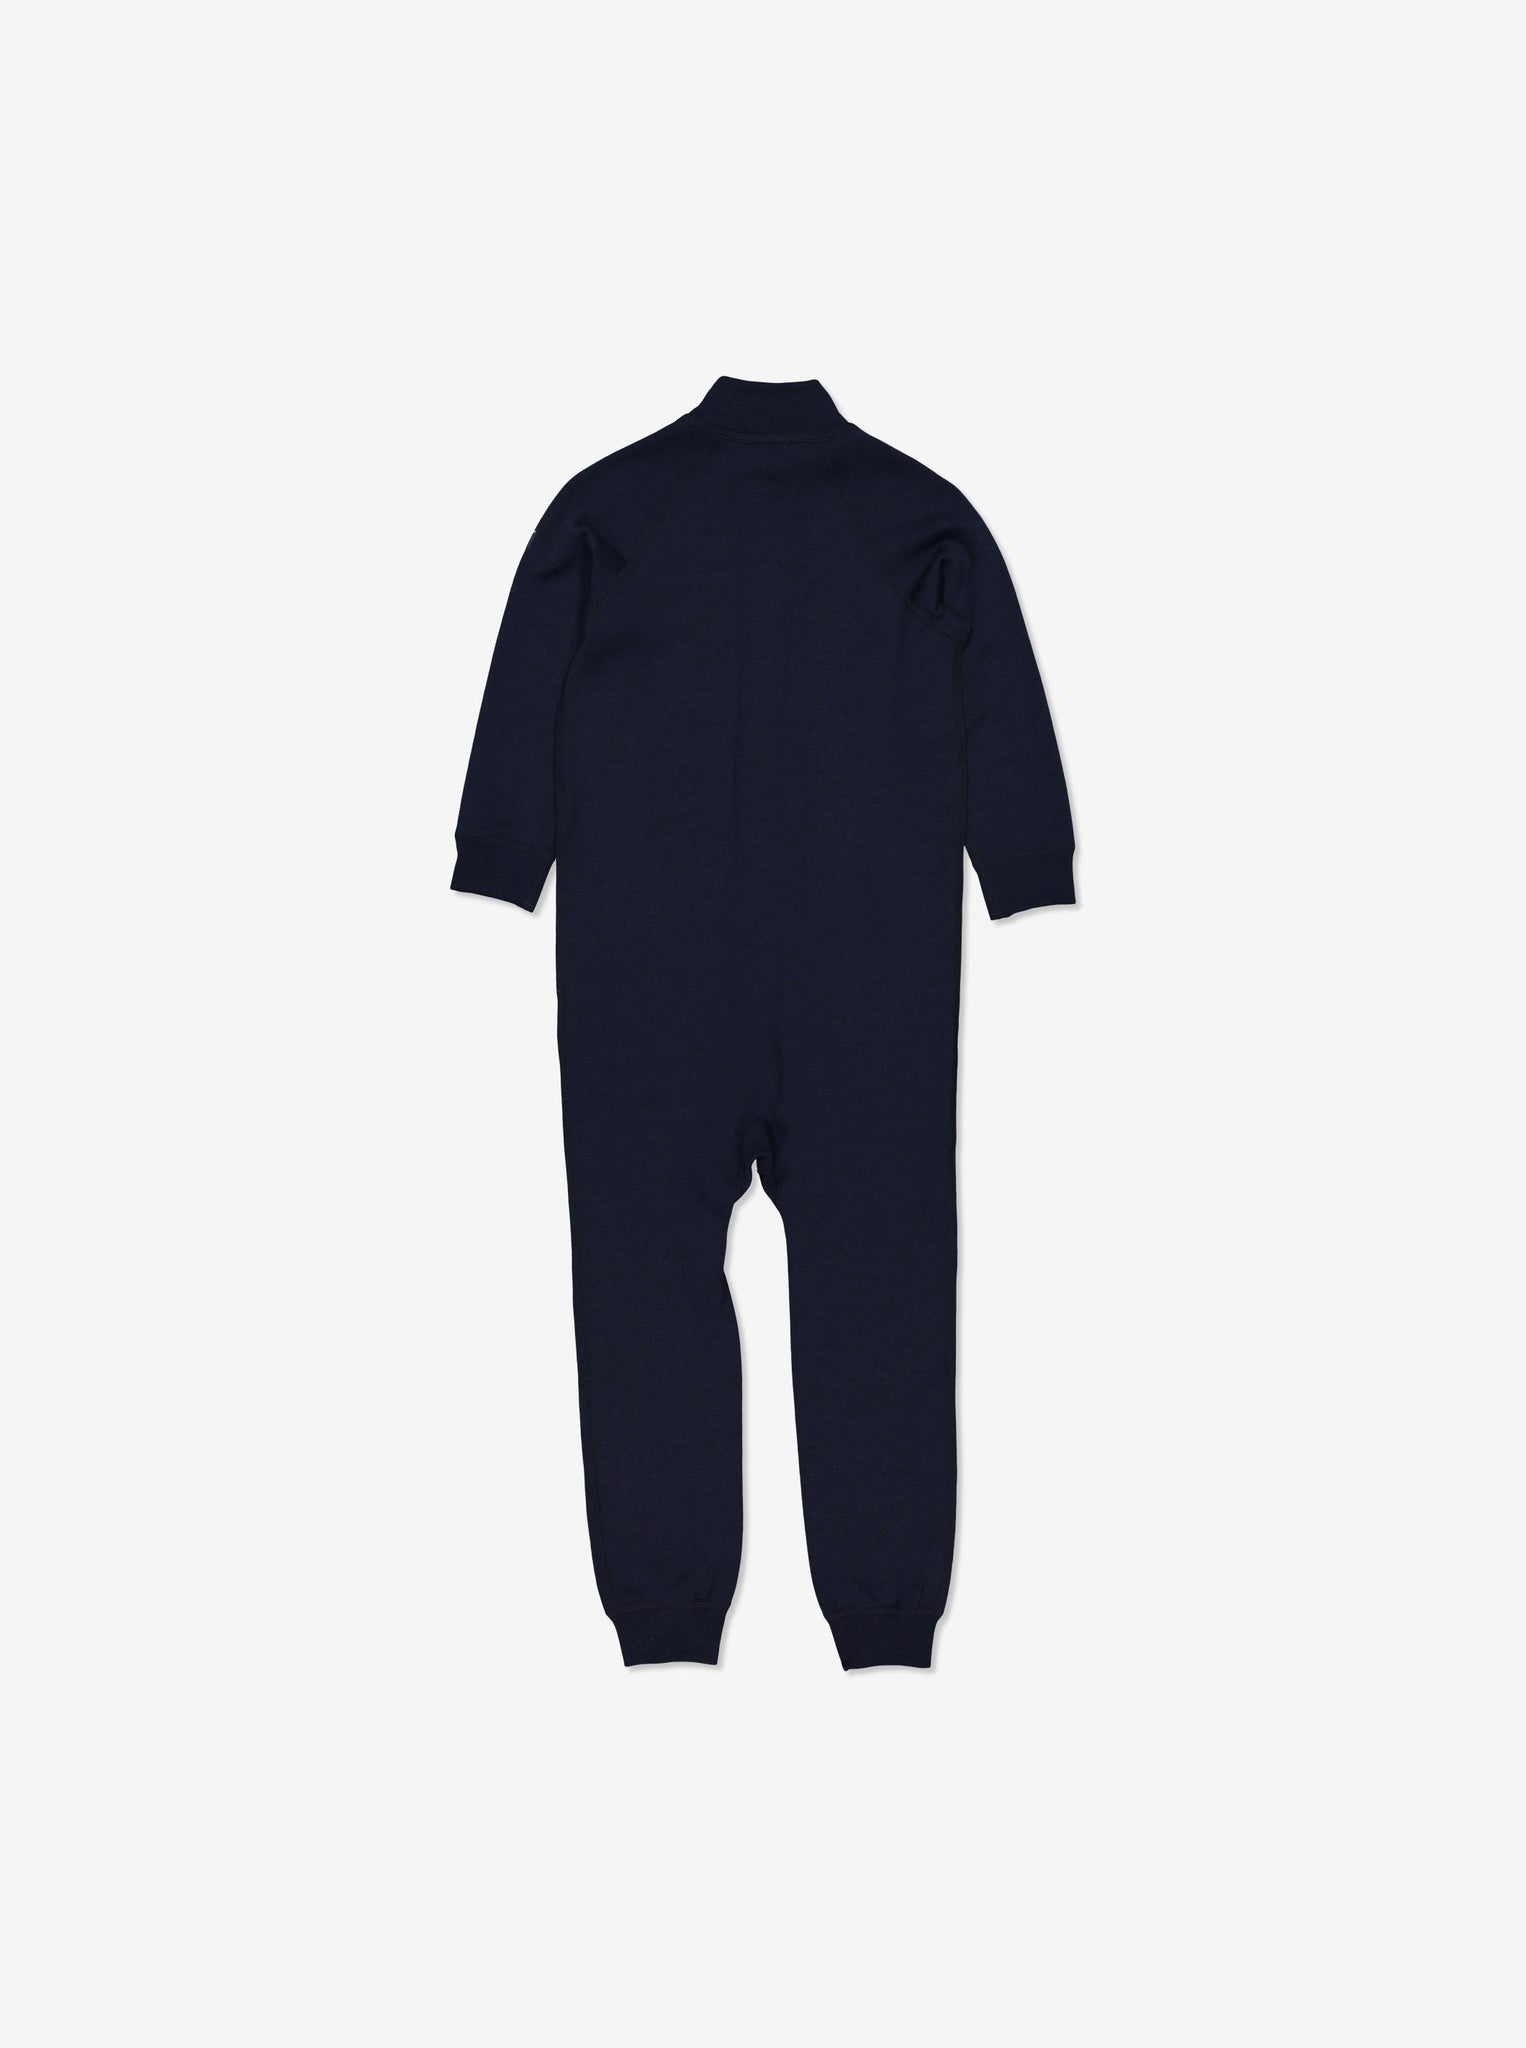 Navy Blue Thermal Merino All-In-One, warm durable and comfortable, ethical long lasting kids clothes polarn o. pyret 